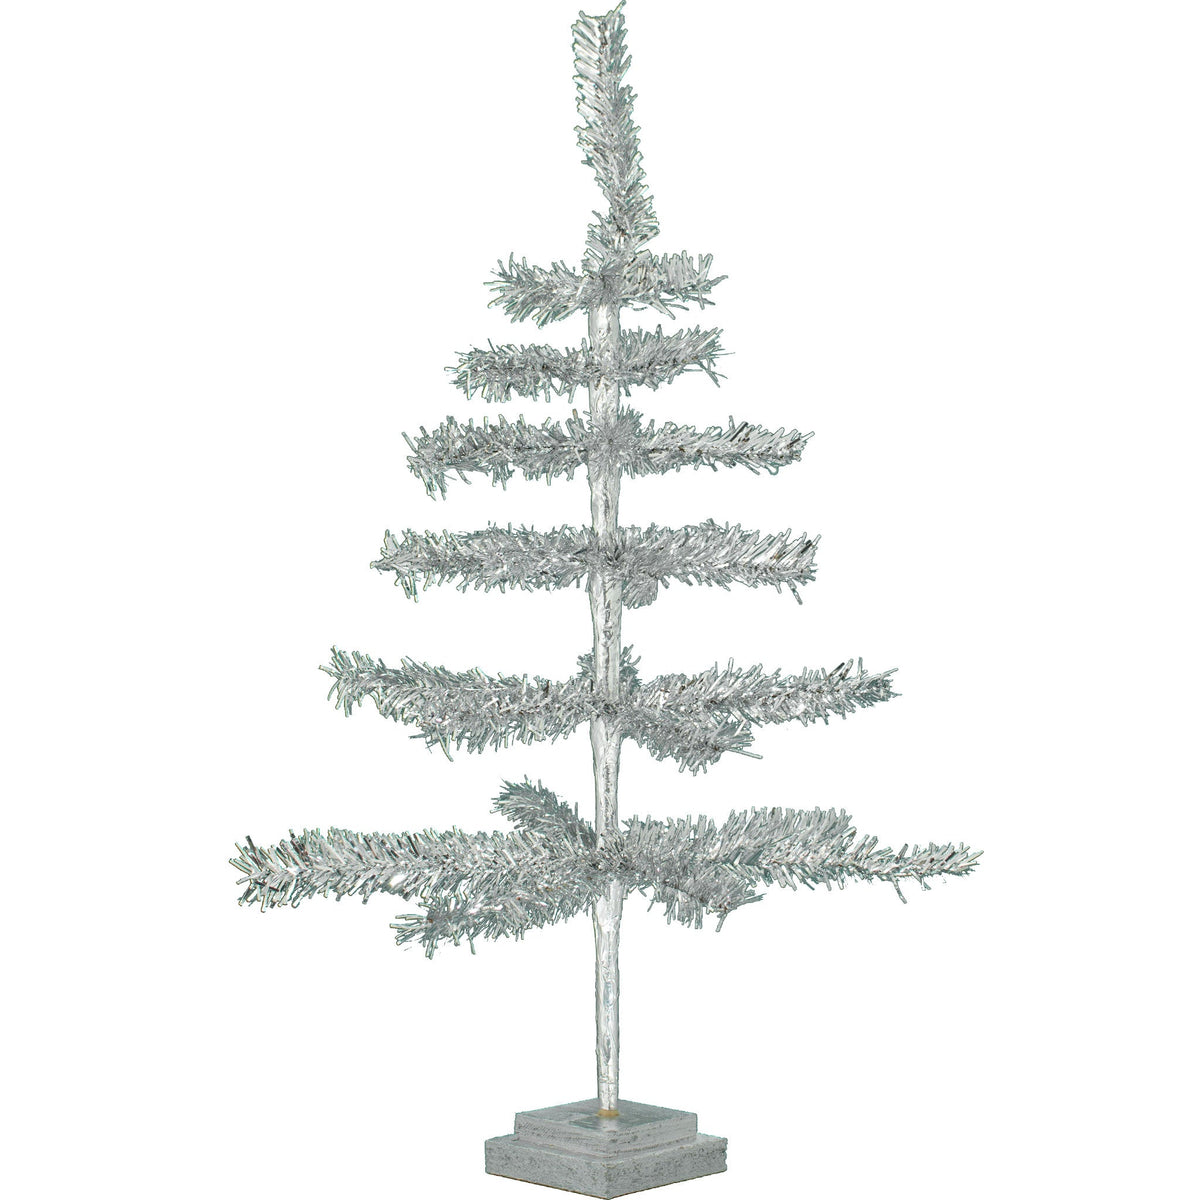 Introducing Lee Display's Limited Edition 28in Tall Vintage Silver Tinsel Christmas Tree – a rare find from our archives, crafted over a decade ago and available in limited quantity.